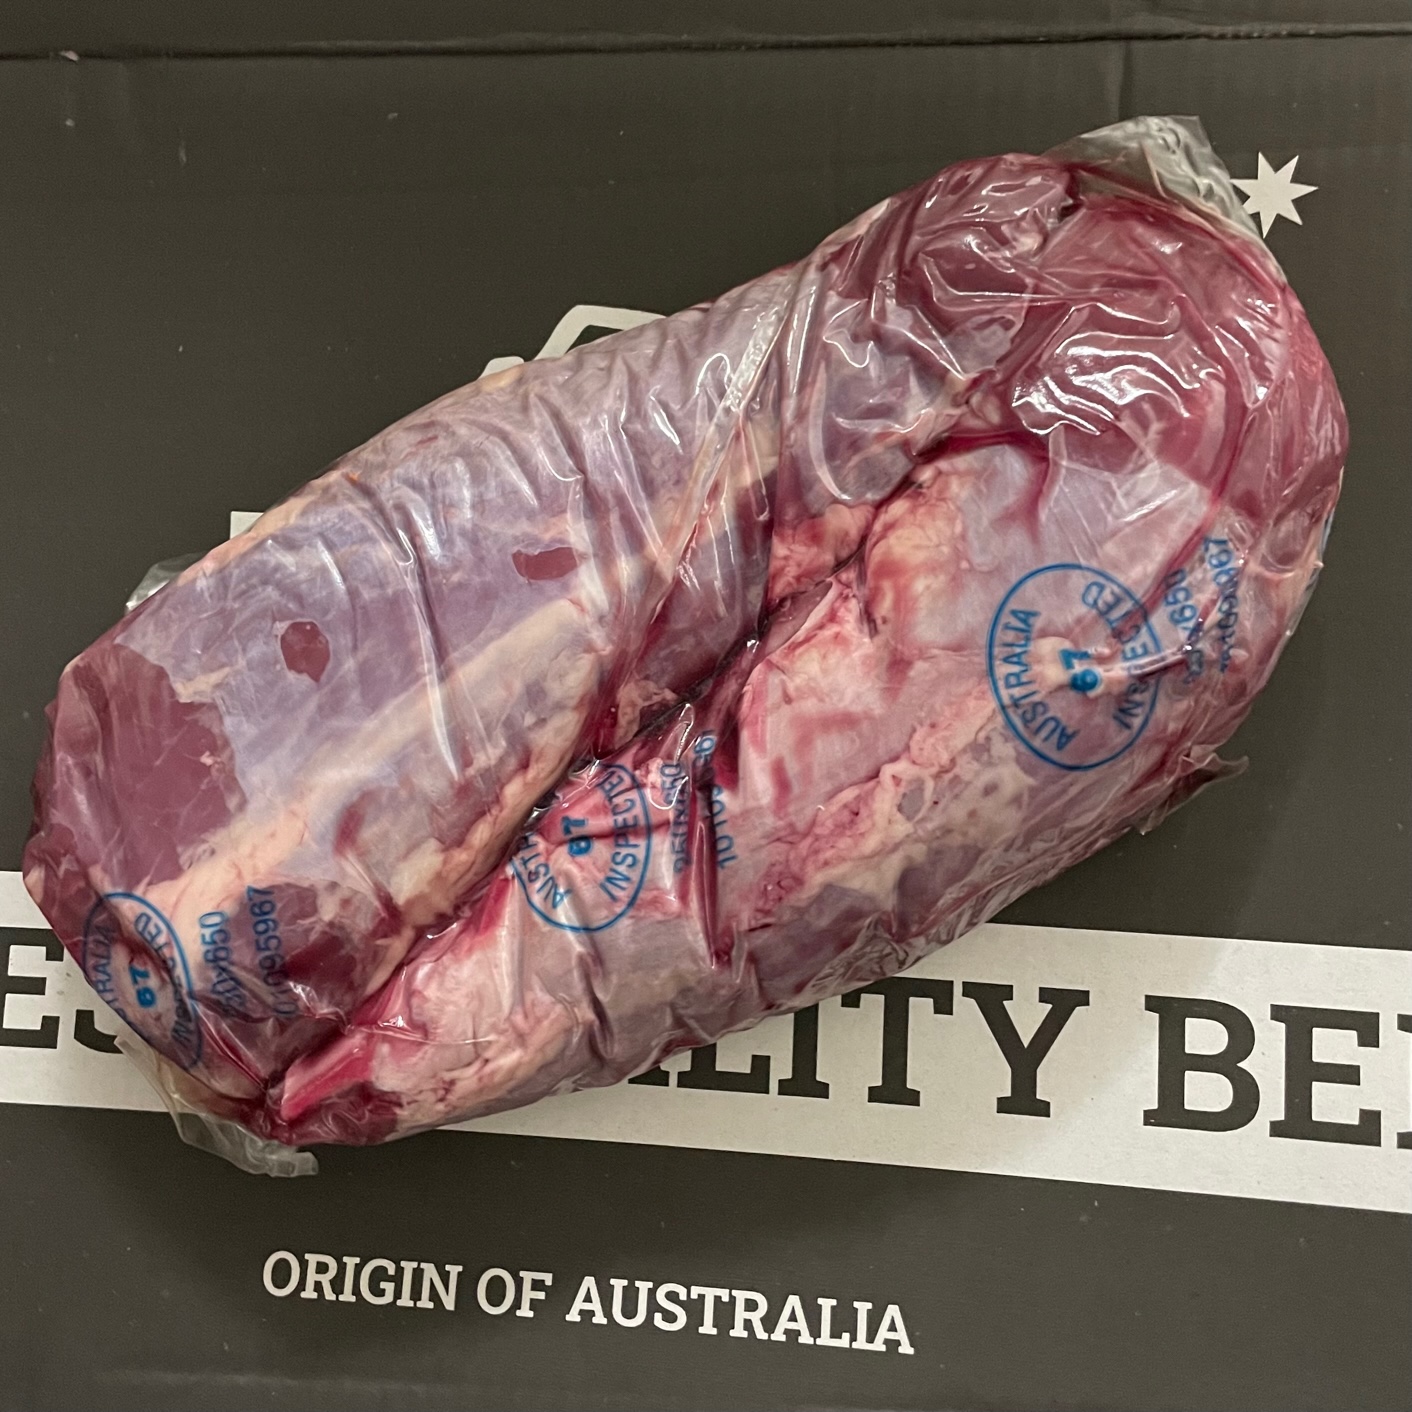 Chuck Tenders x 2 approx. 2.5kg - Grass Fed home delivered sydney